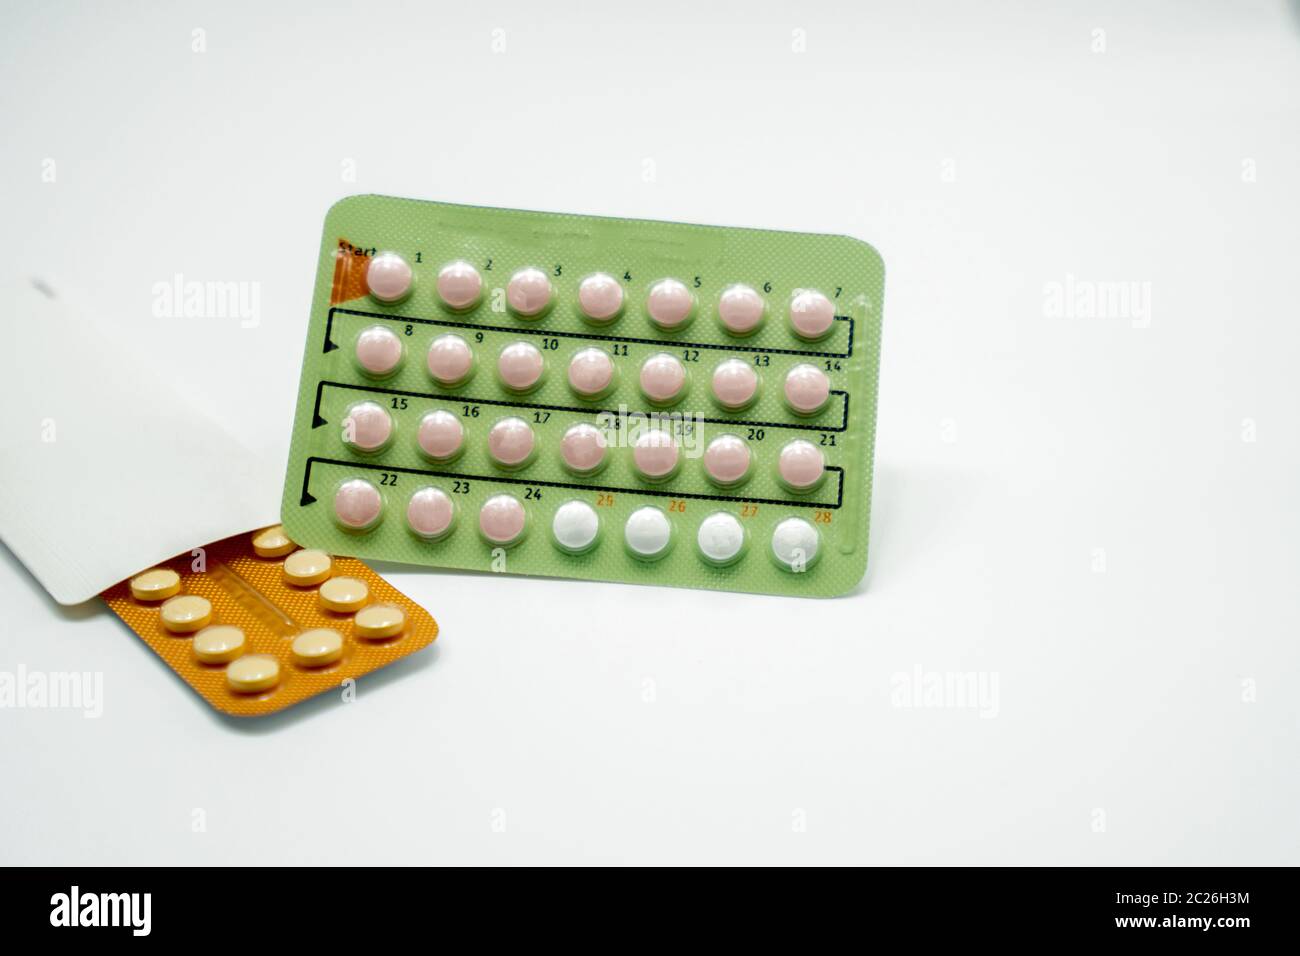 Contraceptive pills in blister pack on white background. Birth control pills. Family planning. Hormones tablet pills. Pharmacy drugstore background. P Stock Photo